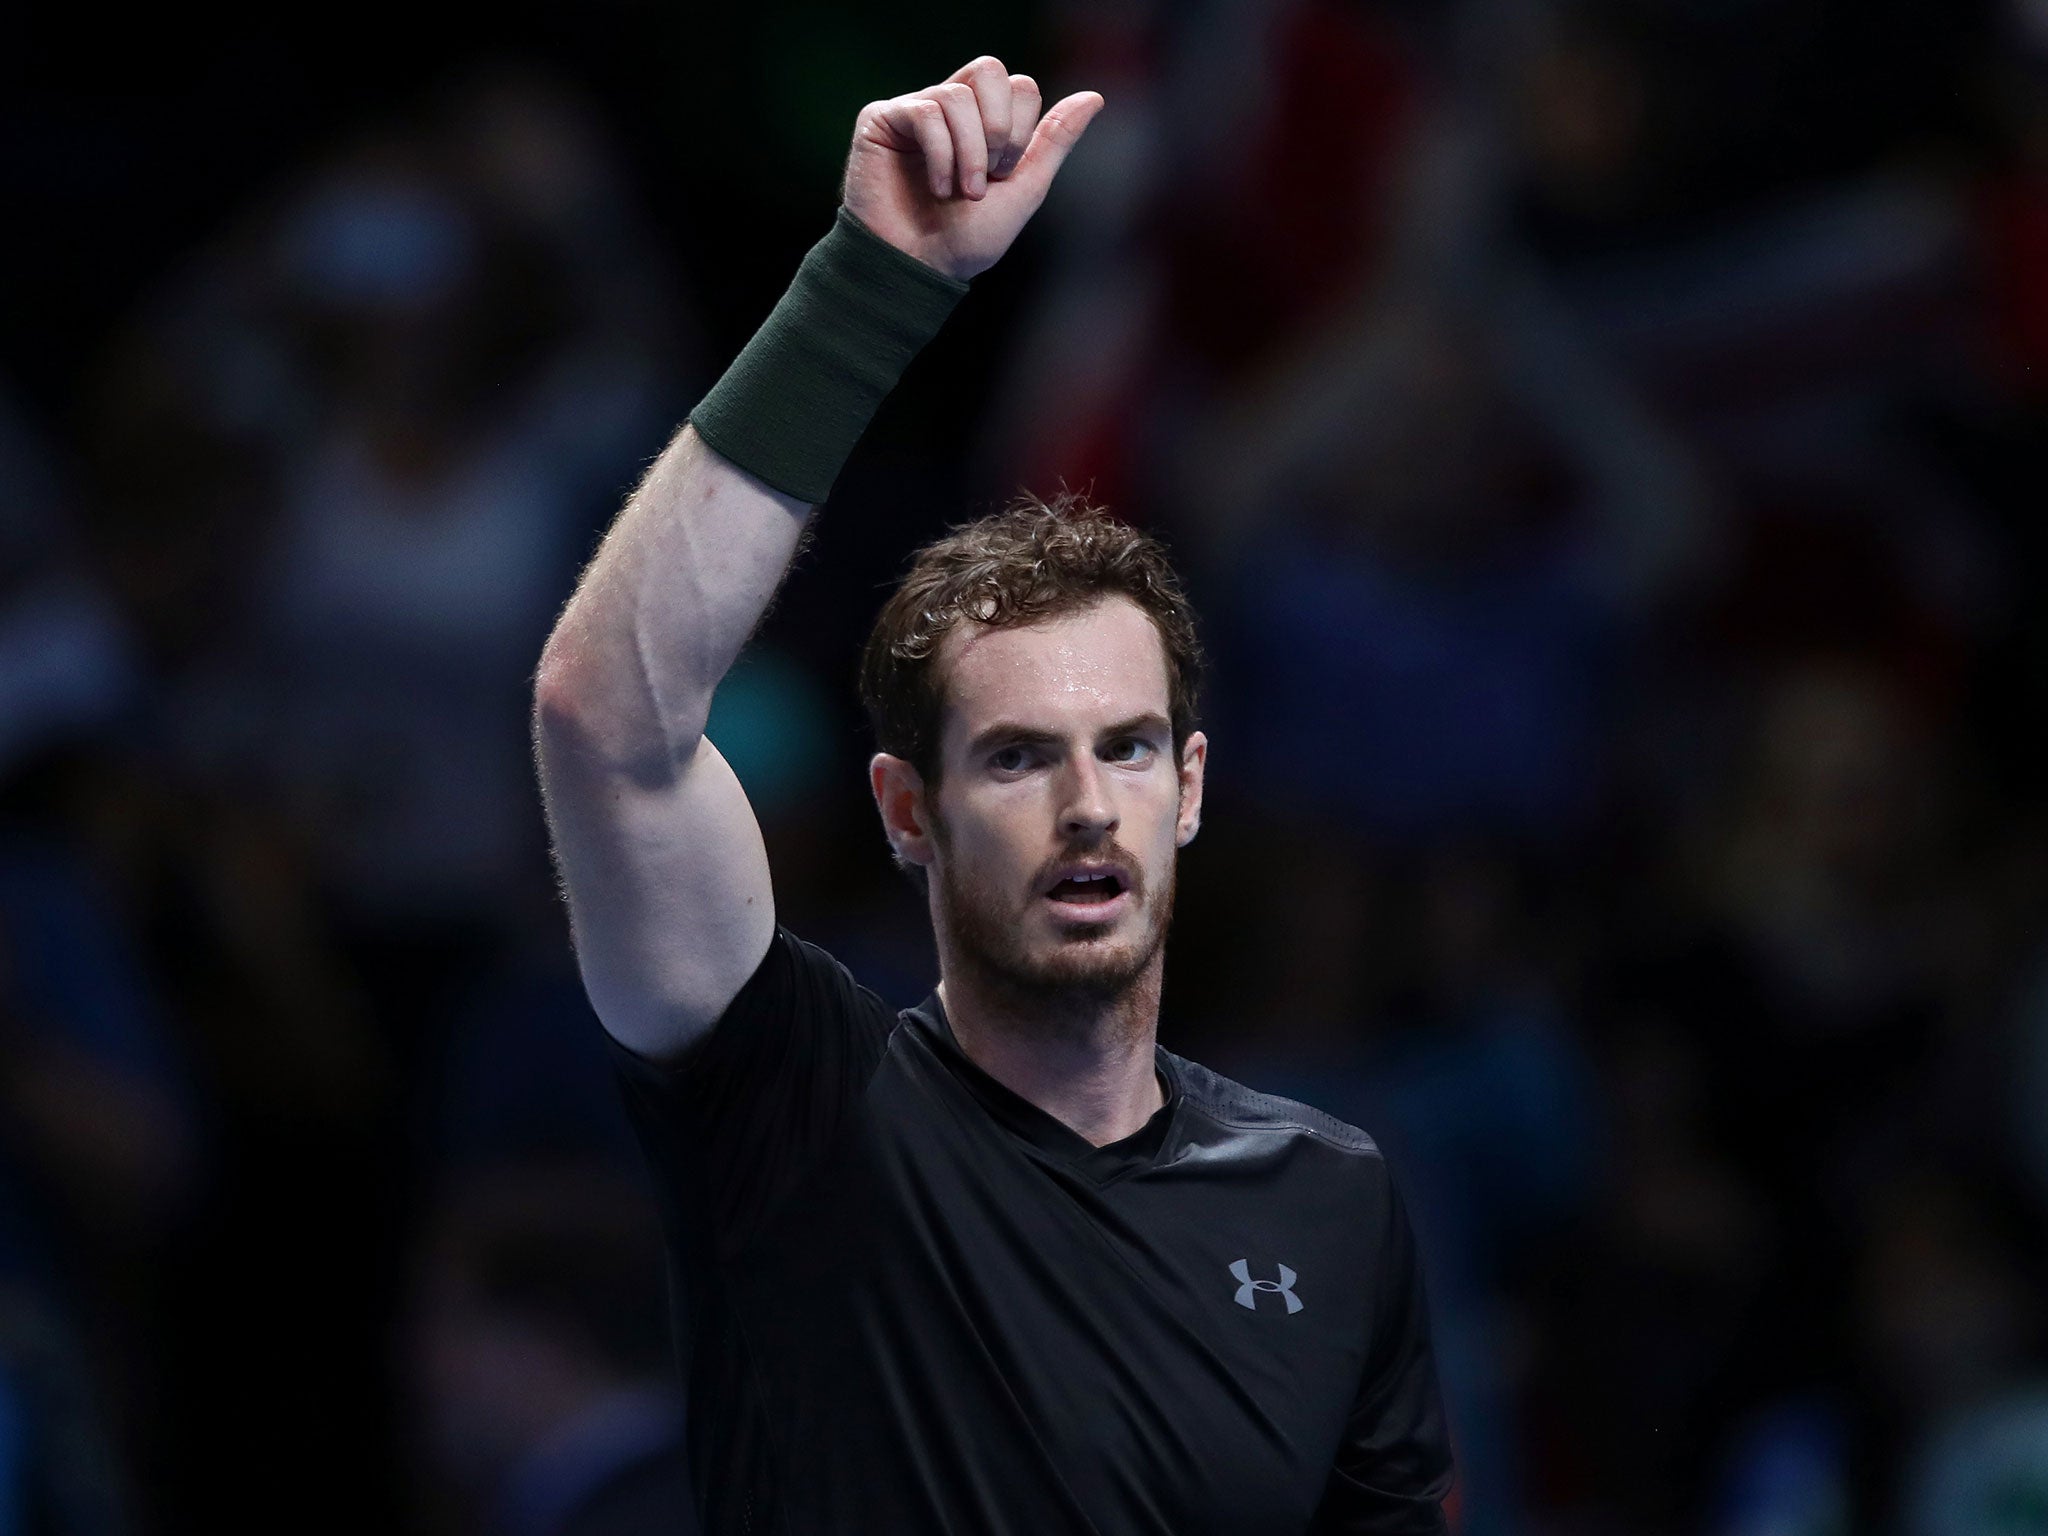 Murray celebrates his victory over Marin Cilic at the ATP World Tour Finals